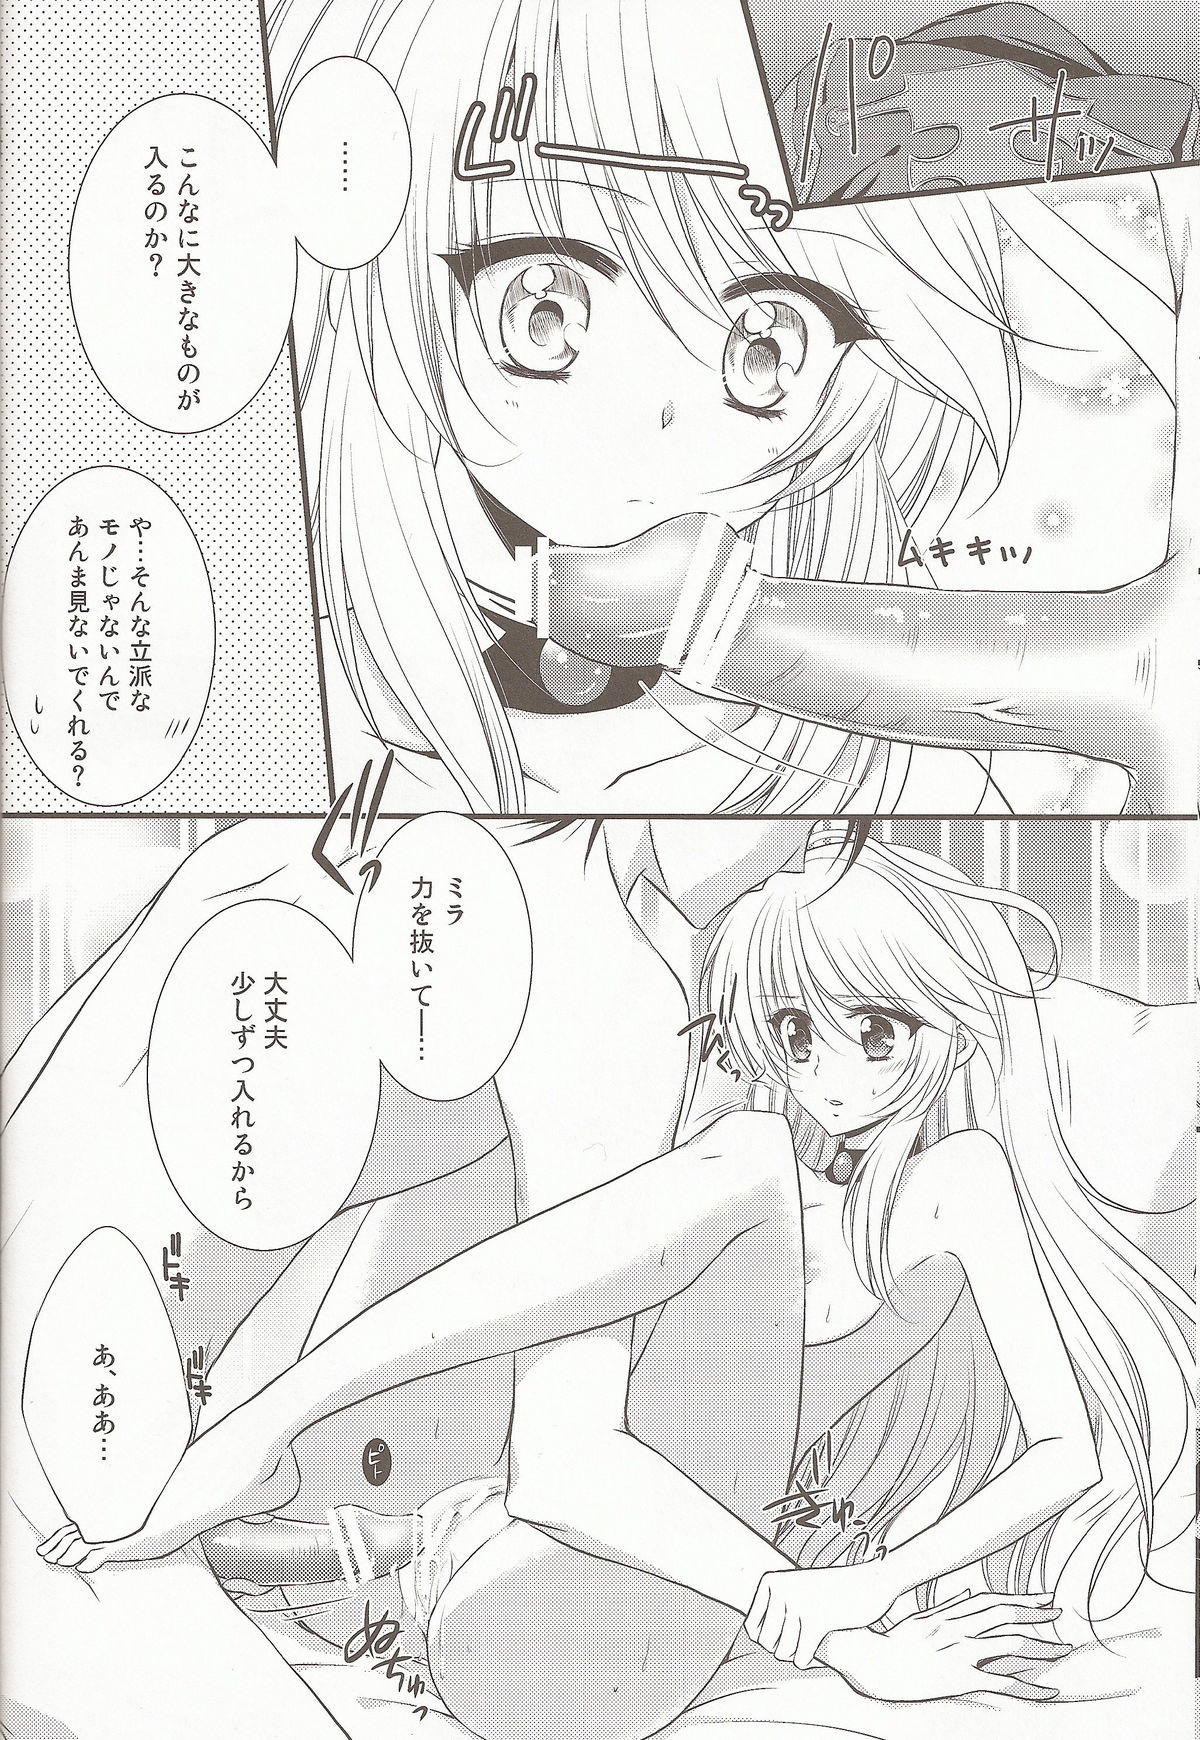 (C81) [Petica (Mikamikan)] External Link (Tales of Xillia) page 12 full